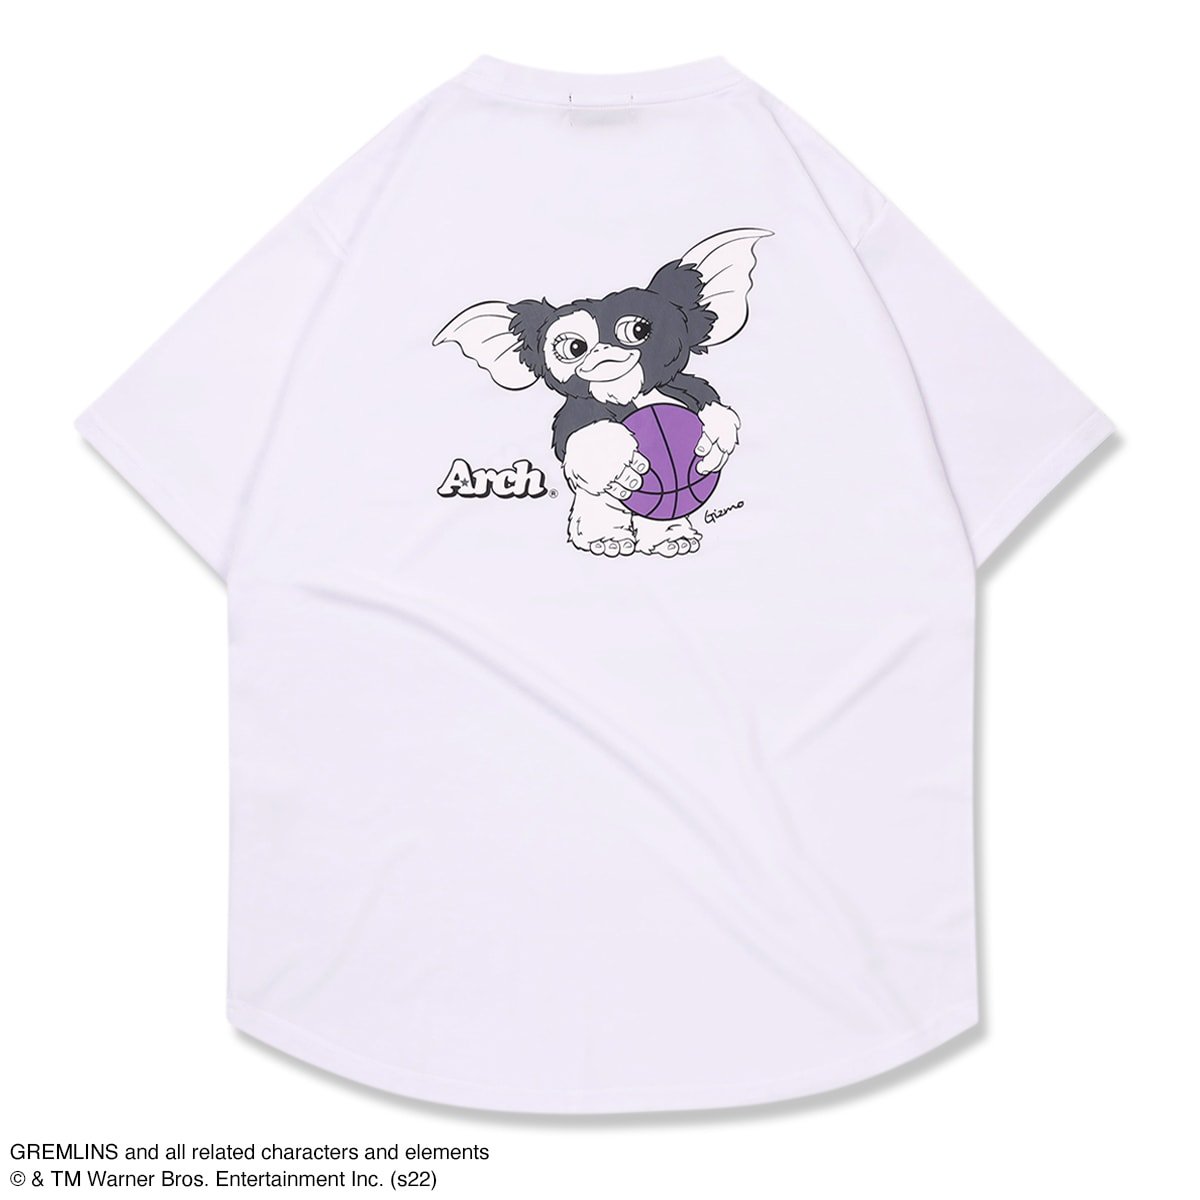 GREMLINS | Arch hoopman tee [DRY]【white】 - Arch ☆ アーチ ...